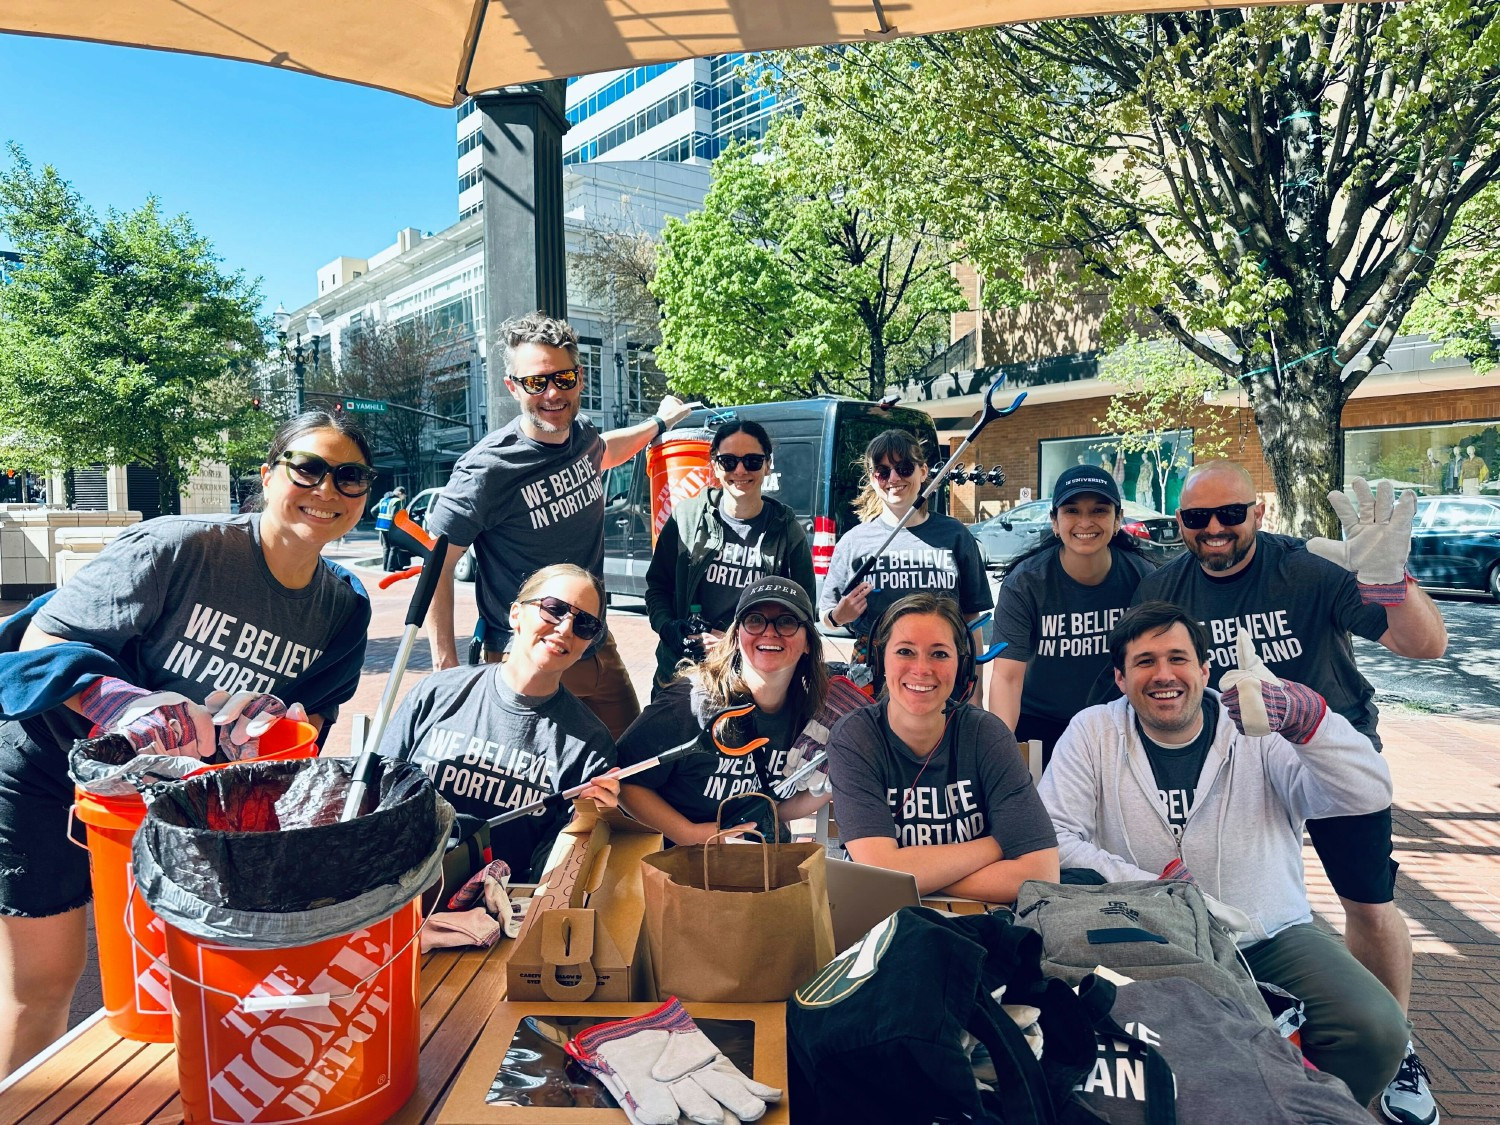 Uplifting our communities is a core value. Team members join a clean up day to reinvigorate downtown Portland.